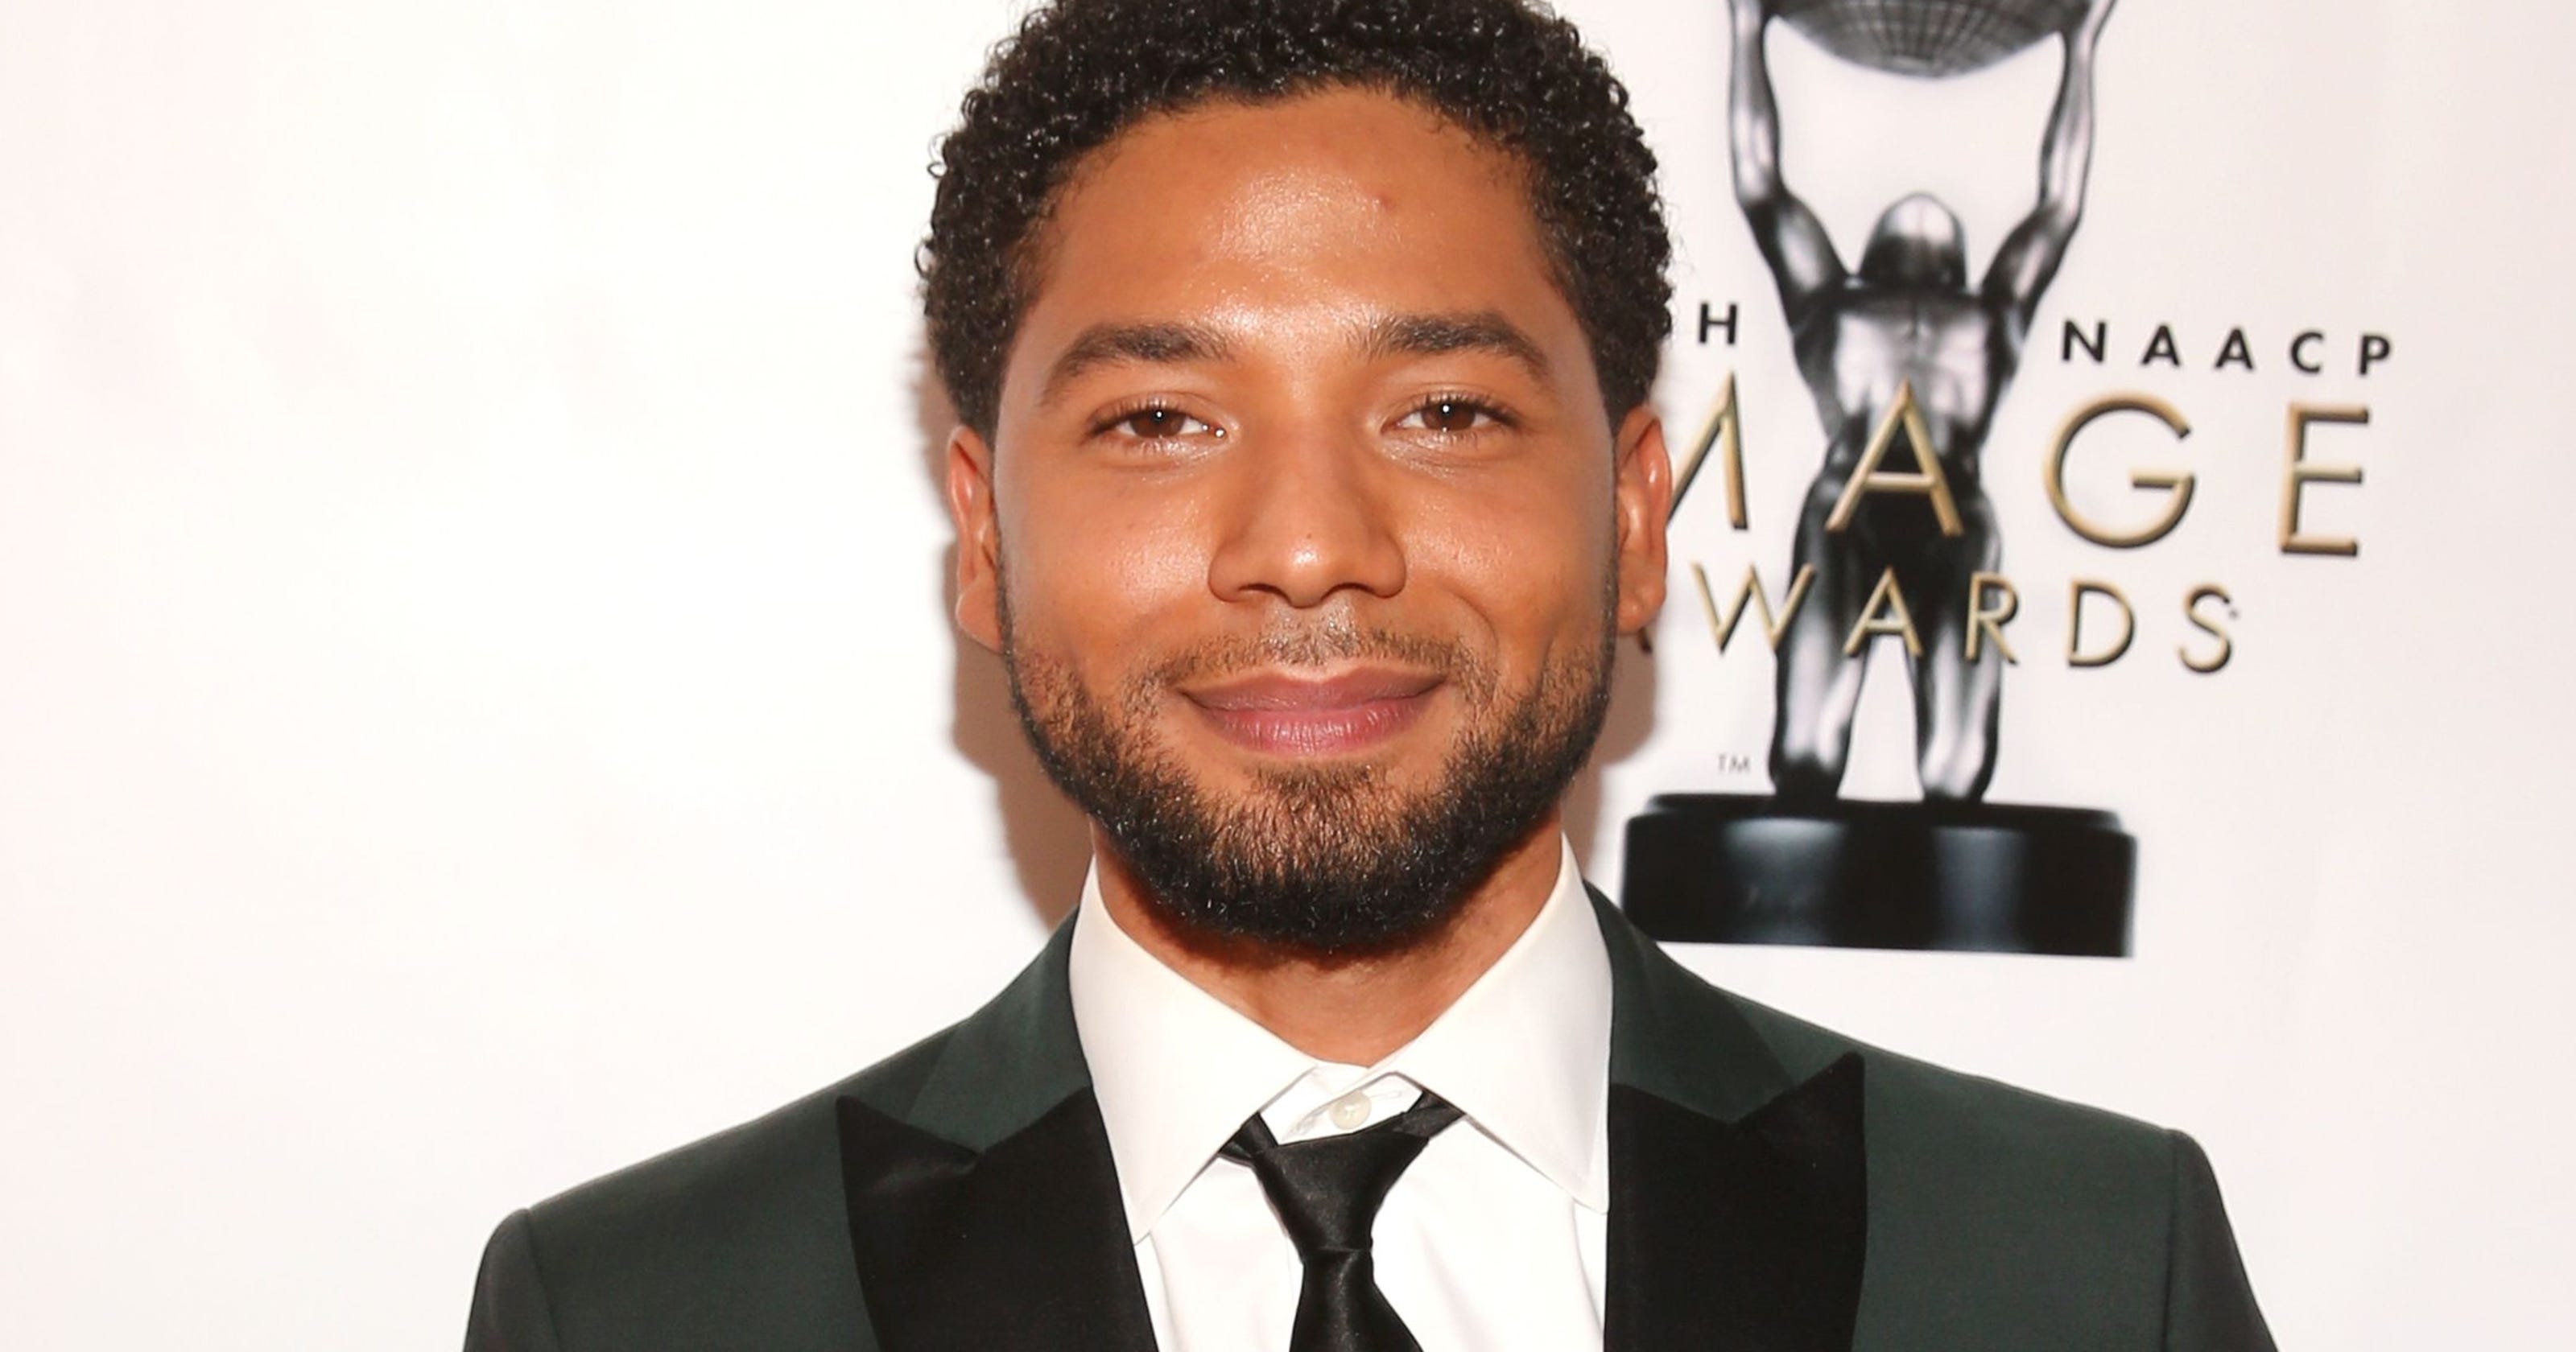 Jussie Smollett, Empire star, assaulted in possible homophobic attack3200 x 1680